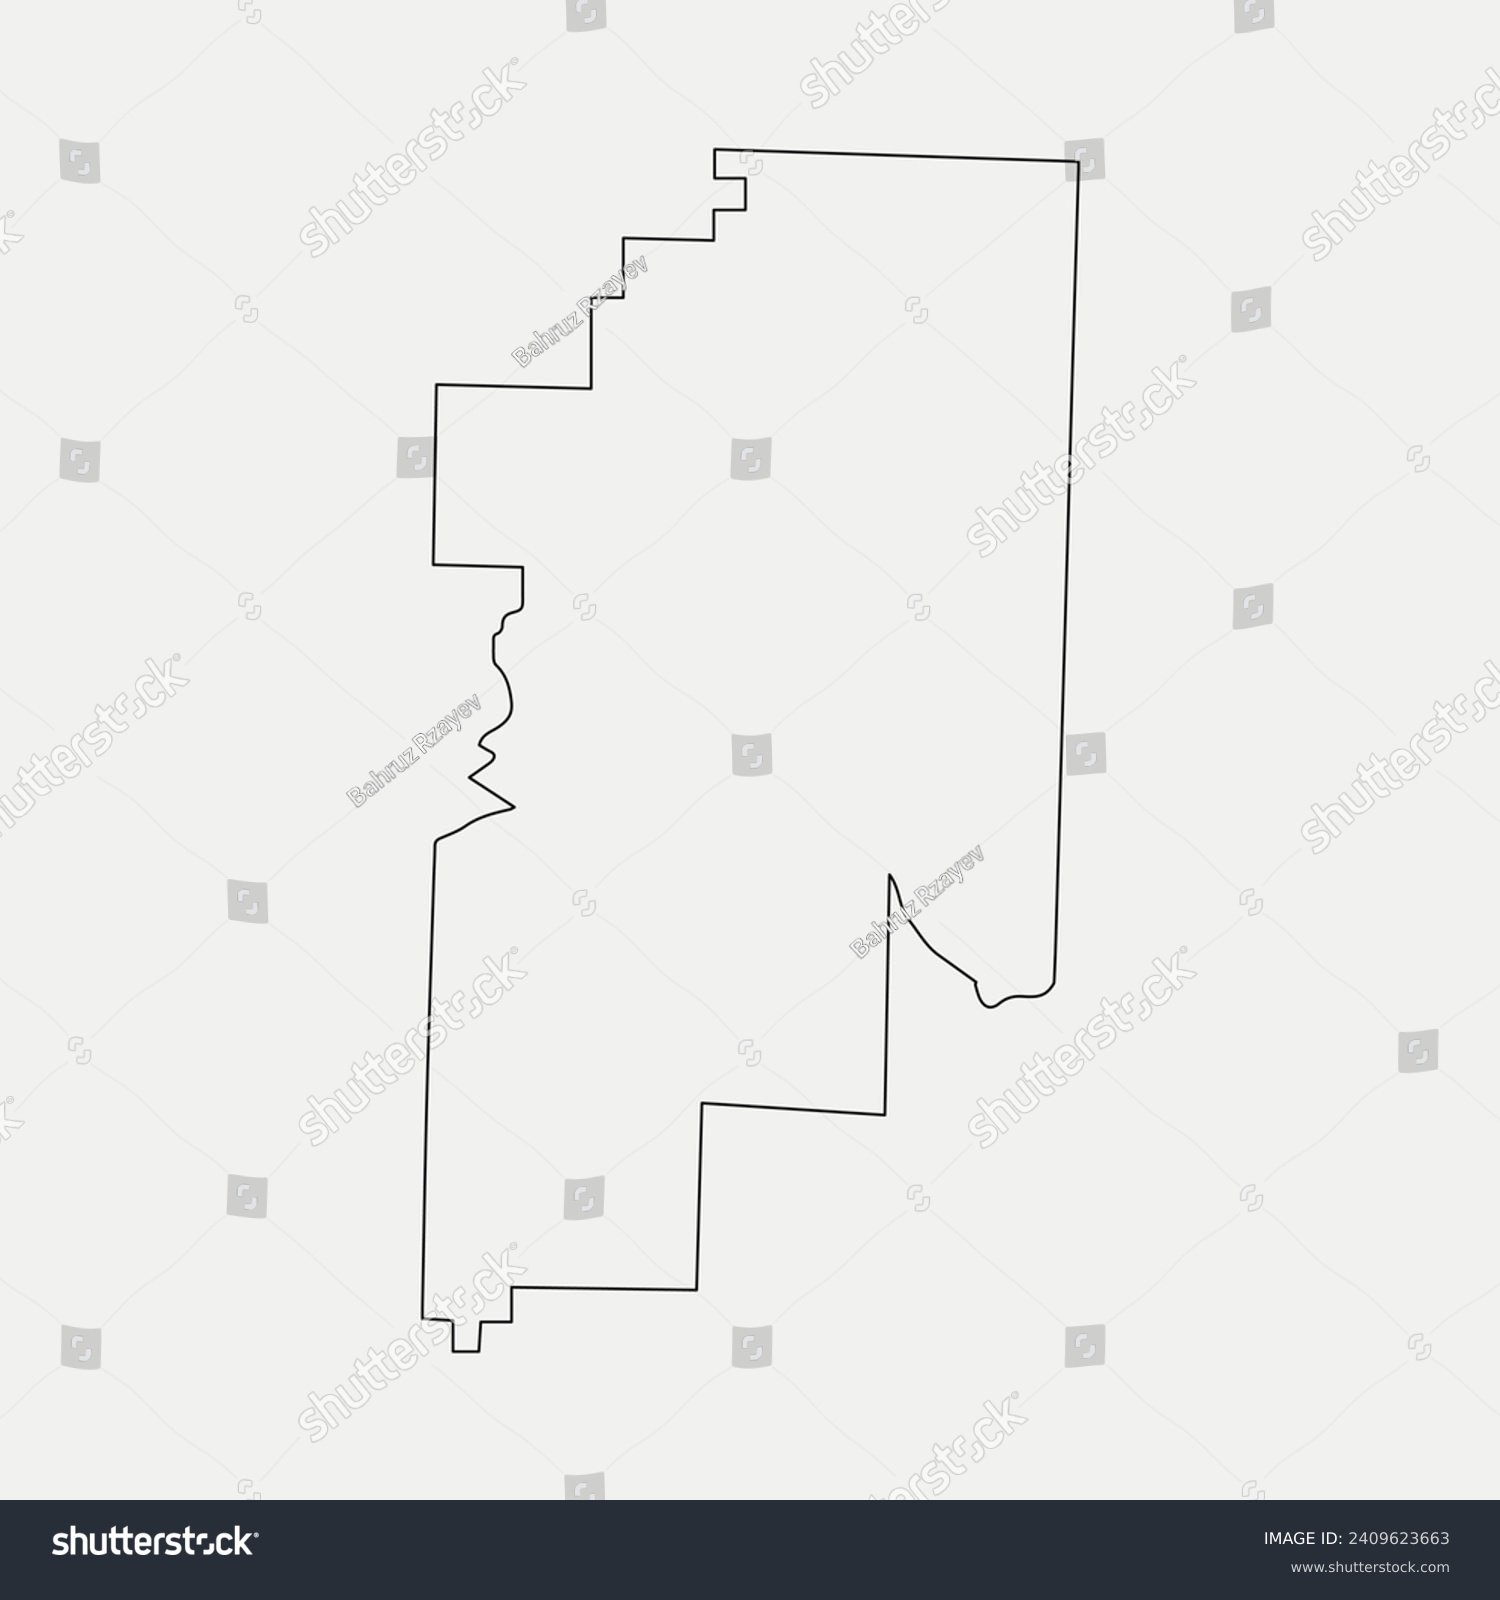 SVG of Map of Franklin County - Arkansas - United States outline silhouette graphic element Illustration template design
 svg